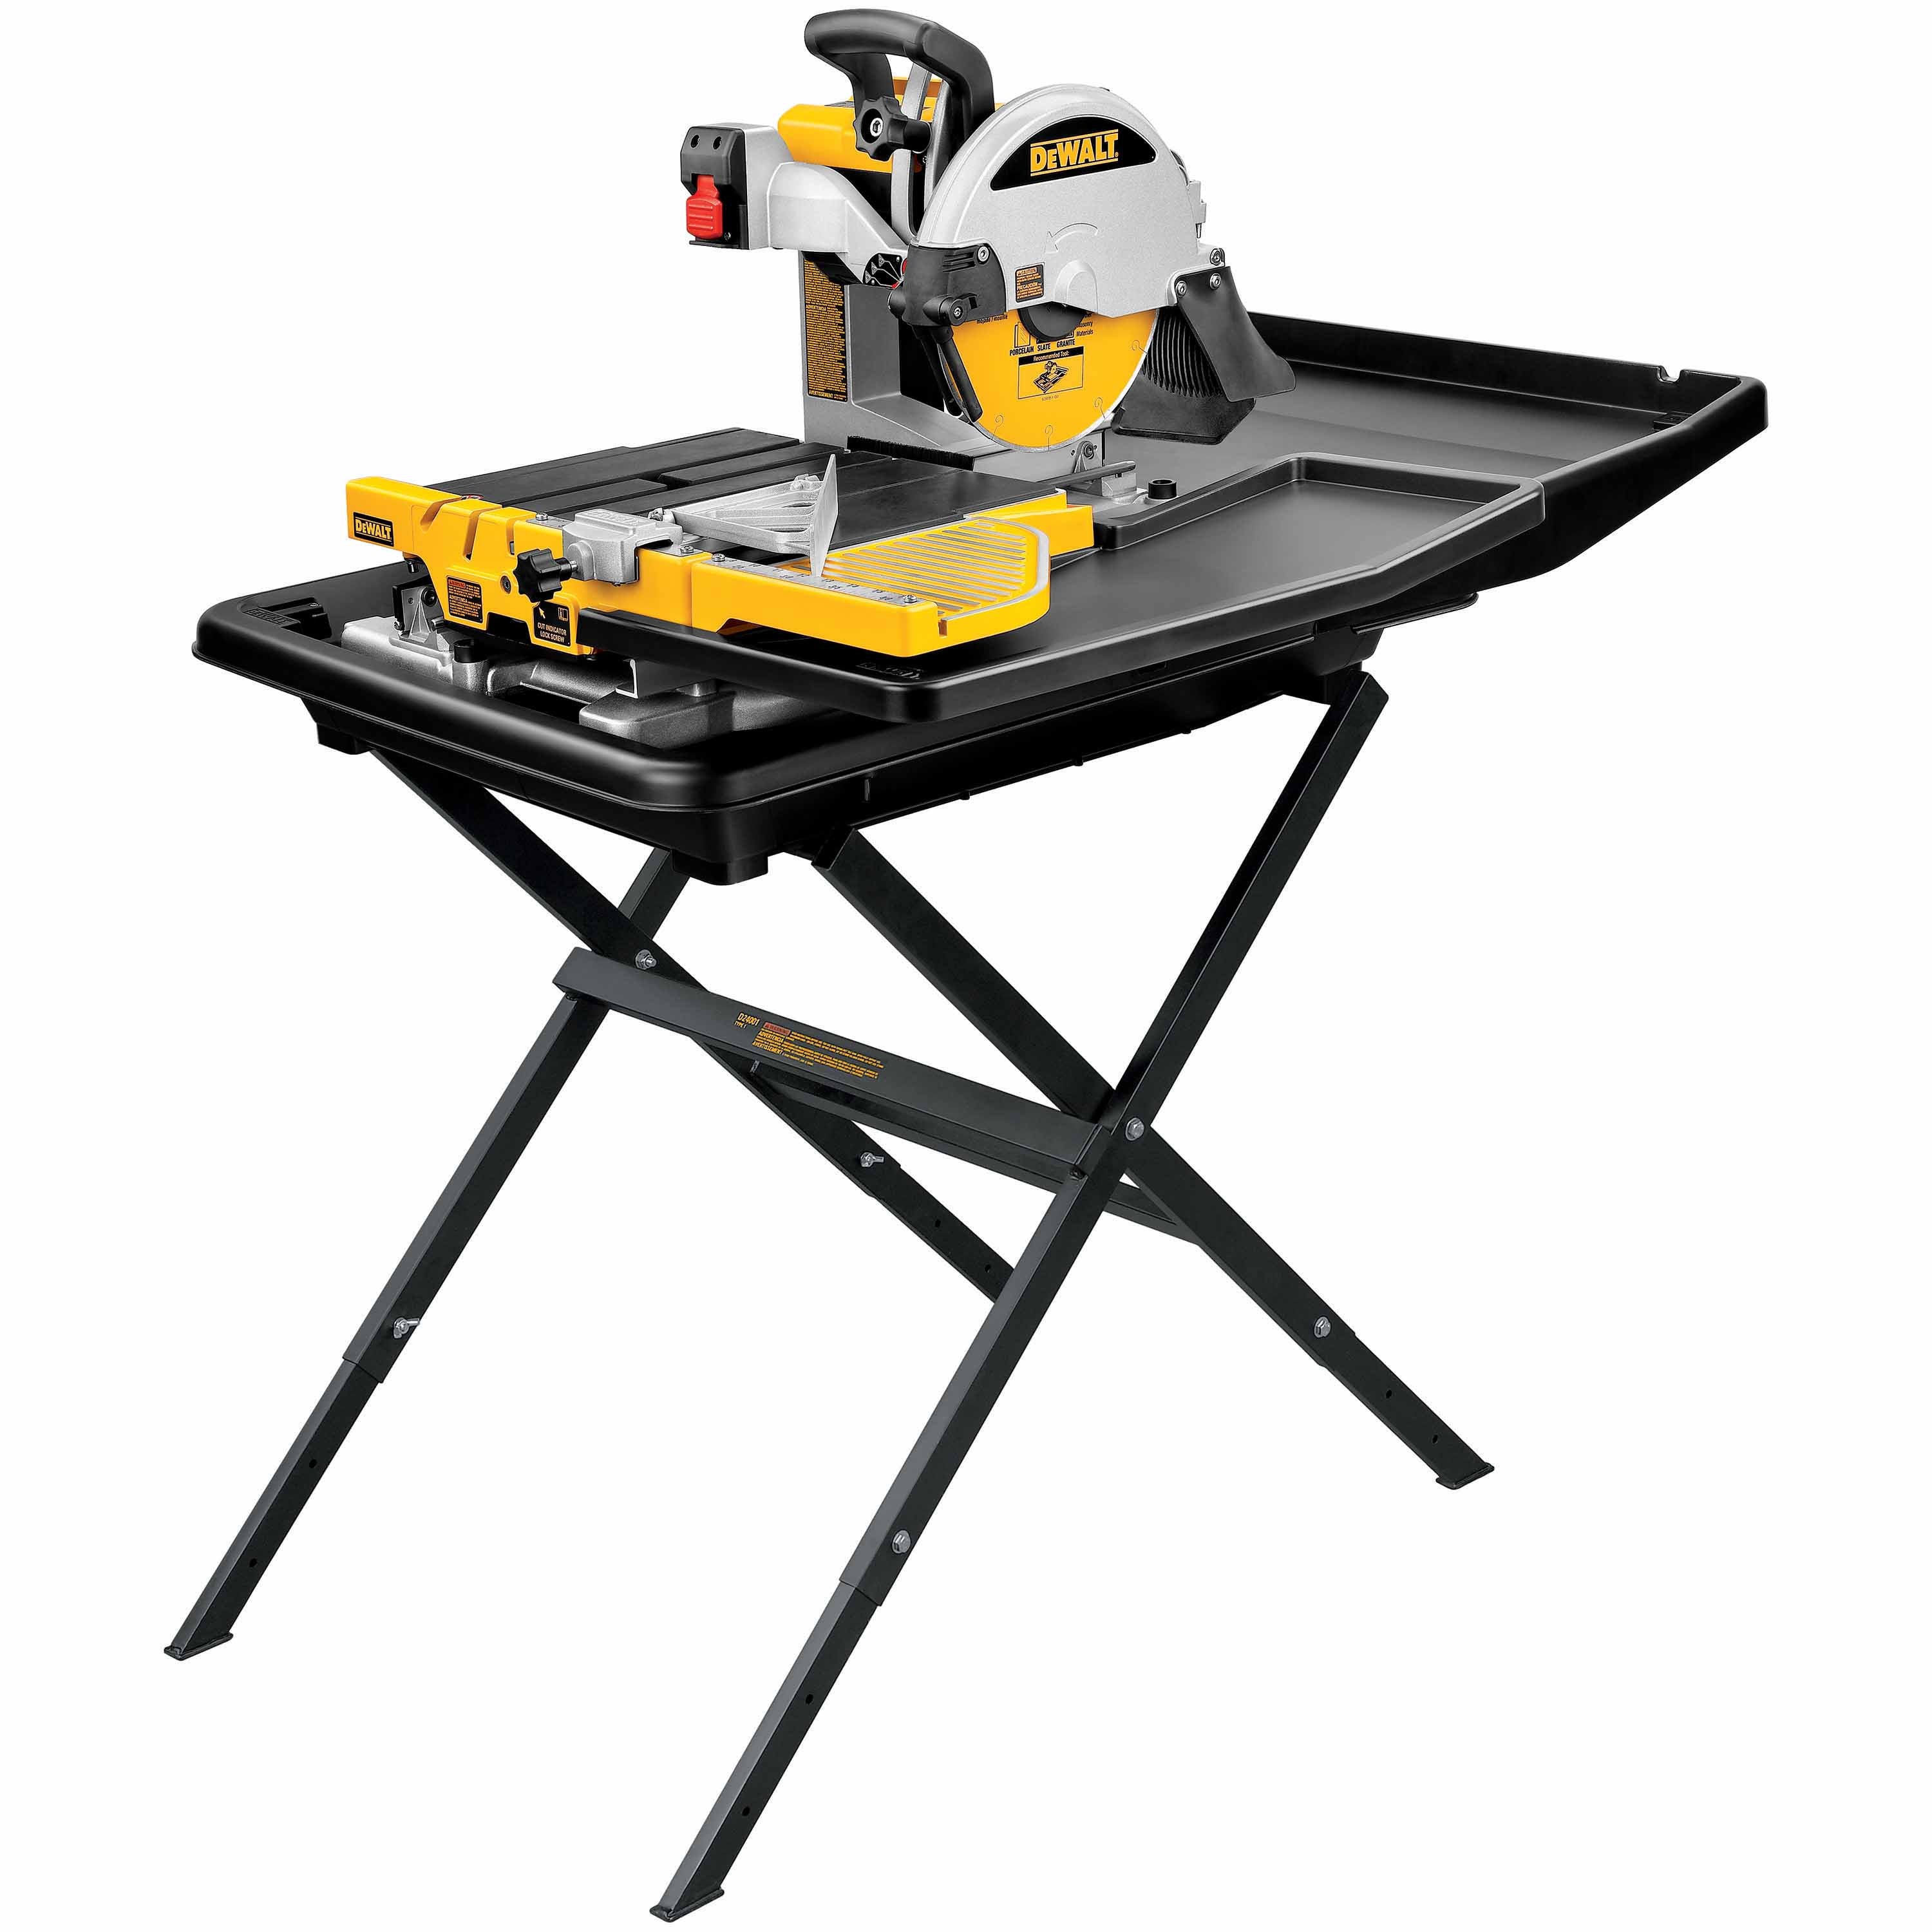 DeWalt D24000S Heavy-Duty 10" Wet Tile Saw with Stand